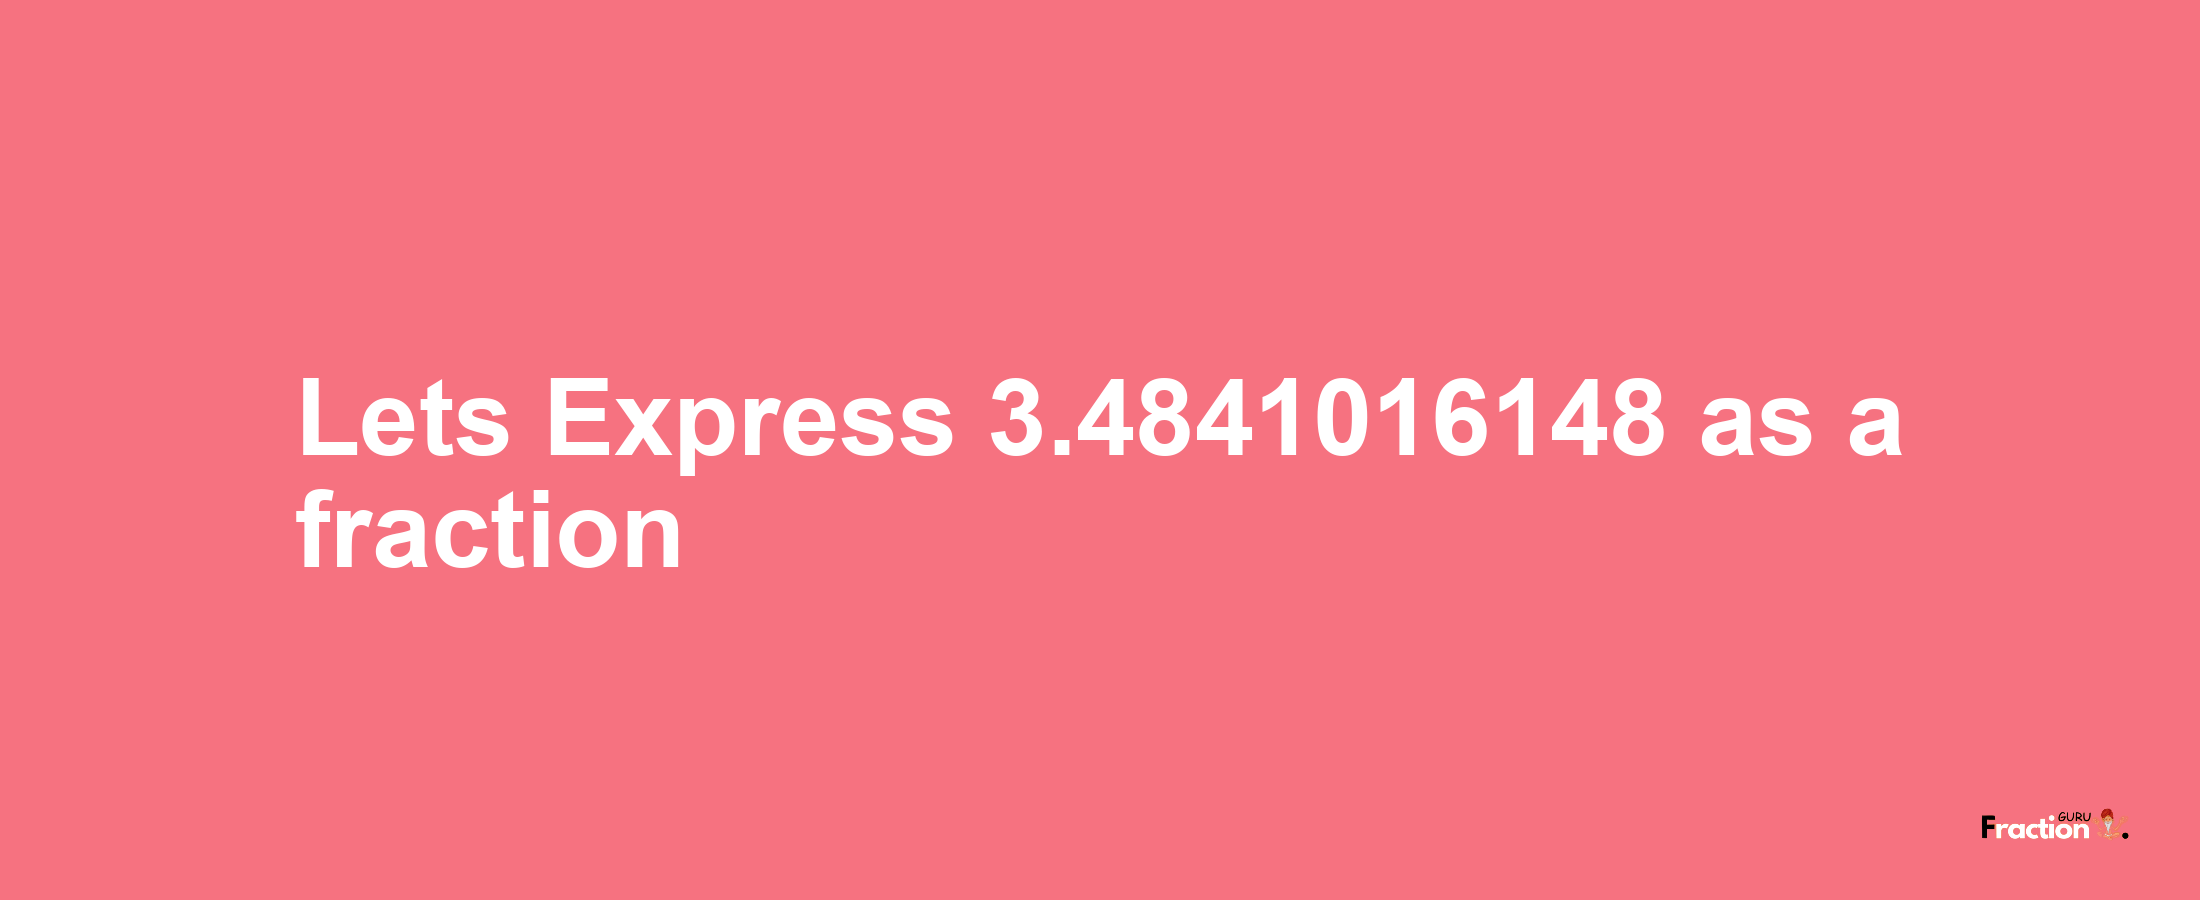 Lets Express 3.4841016148 as afraction